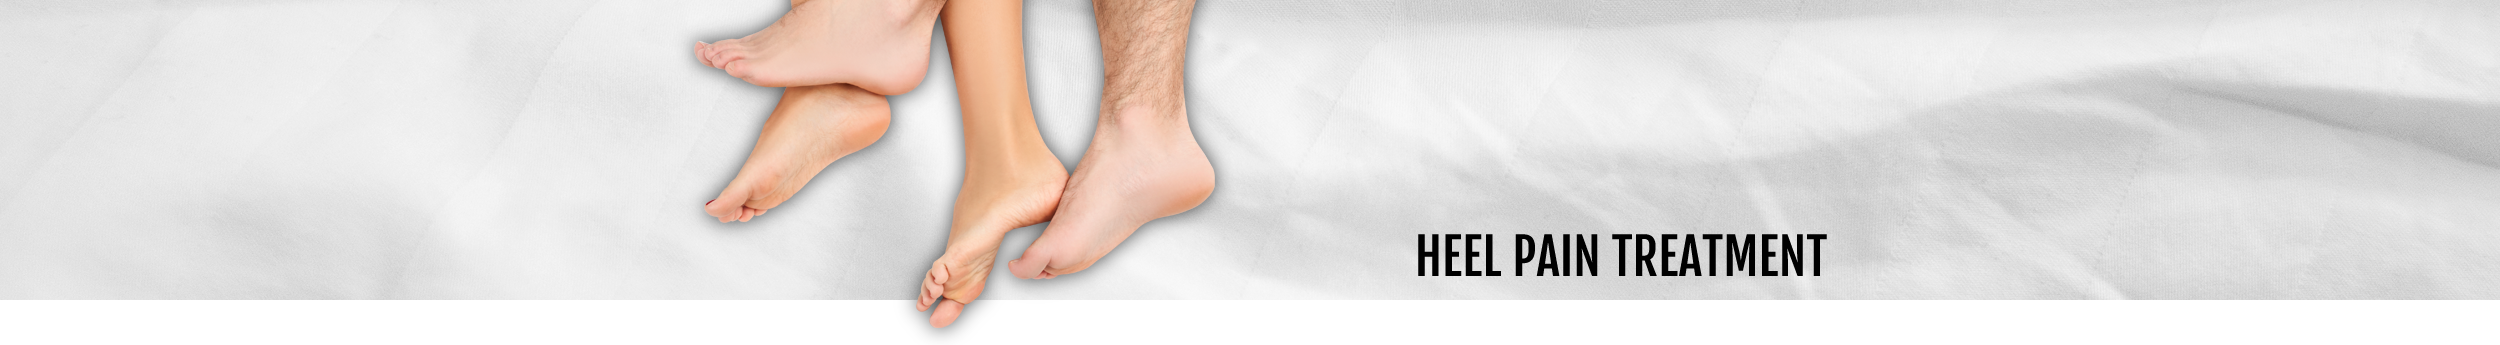 Heel pain treatment header for the Walk IN Foot Clinic in central London